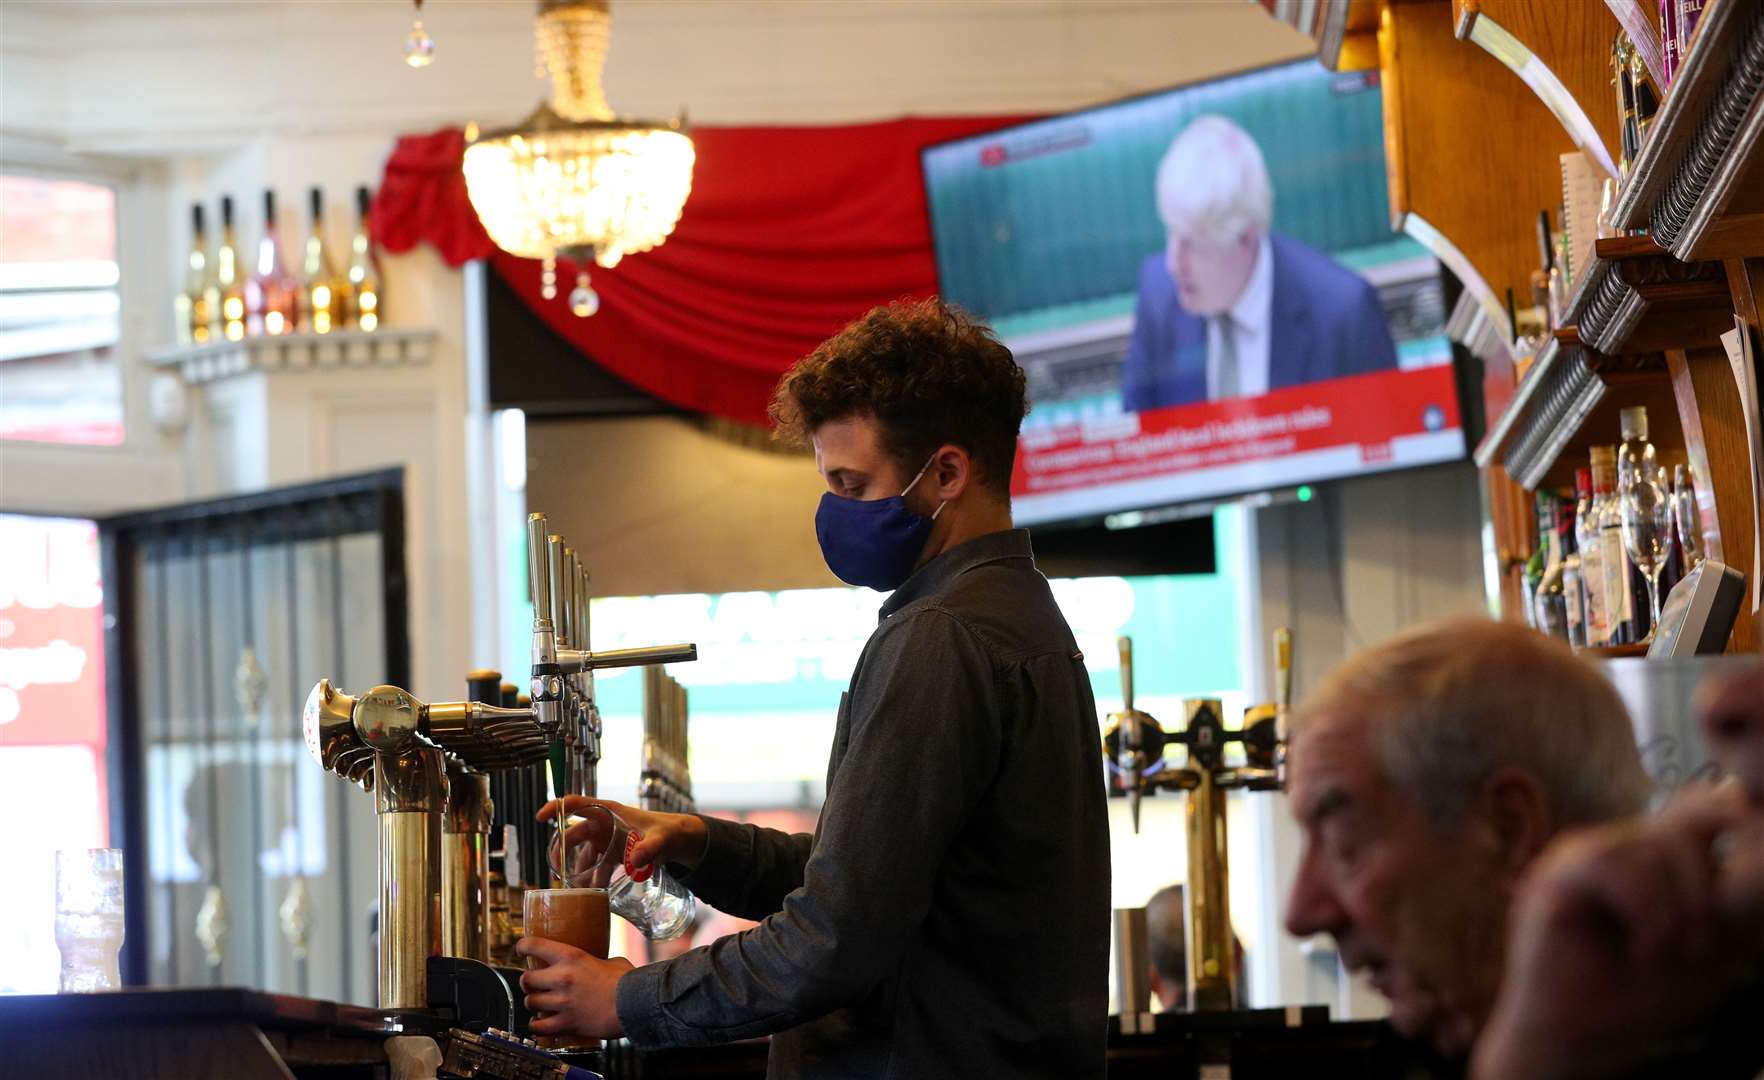 A member of staff pours a drink in the Richmond pub in Liverpool as Prime Minister Boris Johnson reads a statement on television (Peter Byrne/PA)